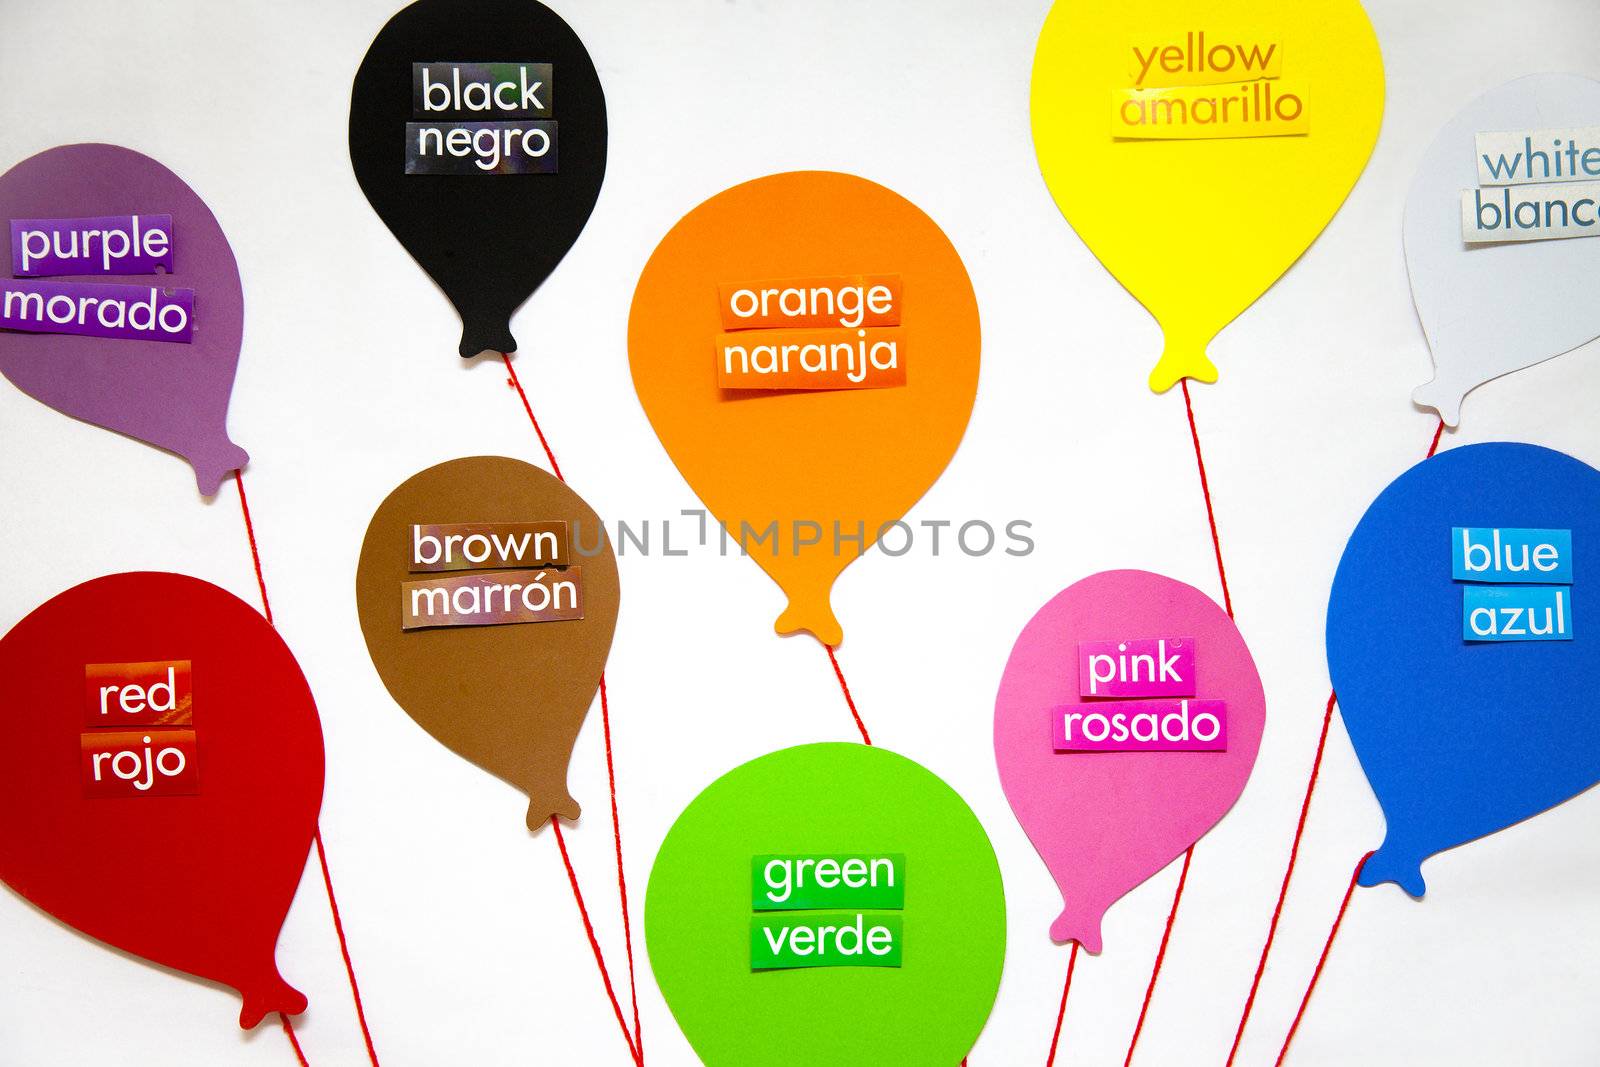 The English and Spanish words for each color labels a balloon for each color